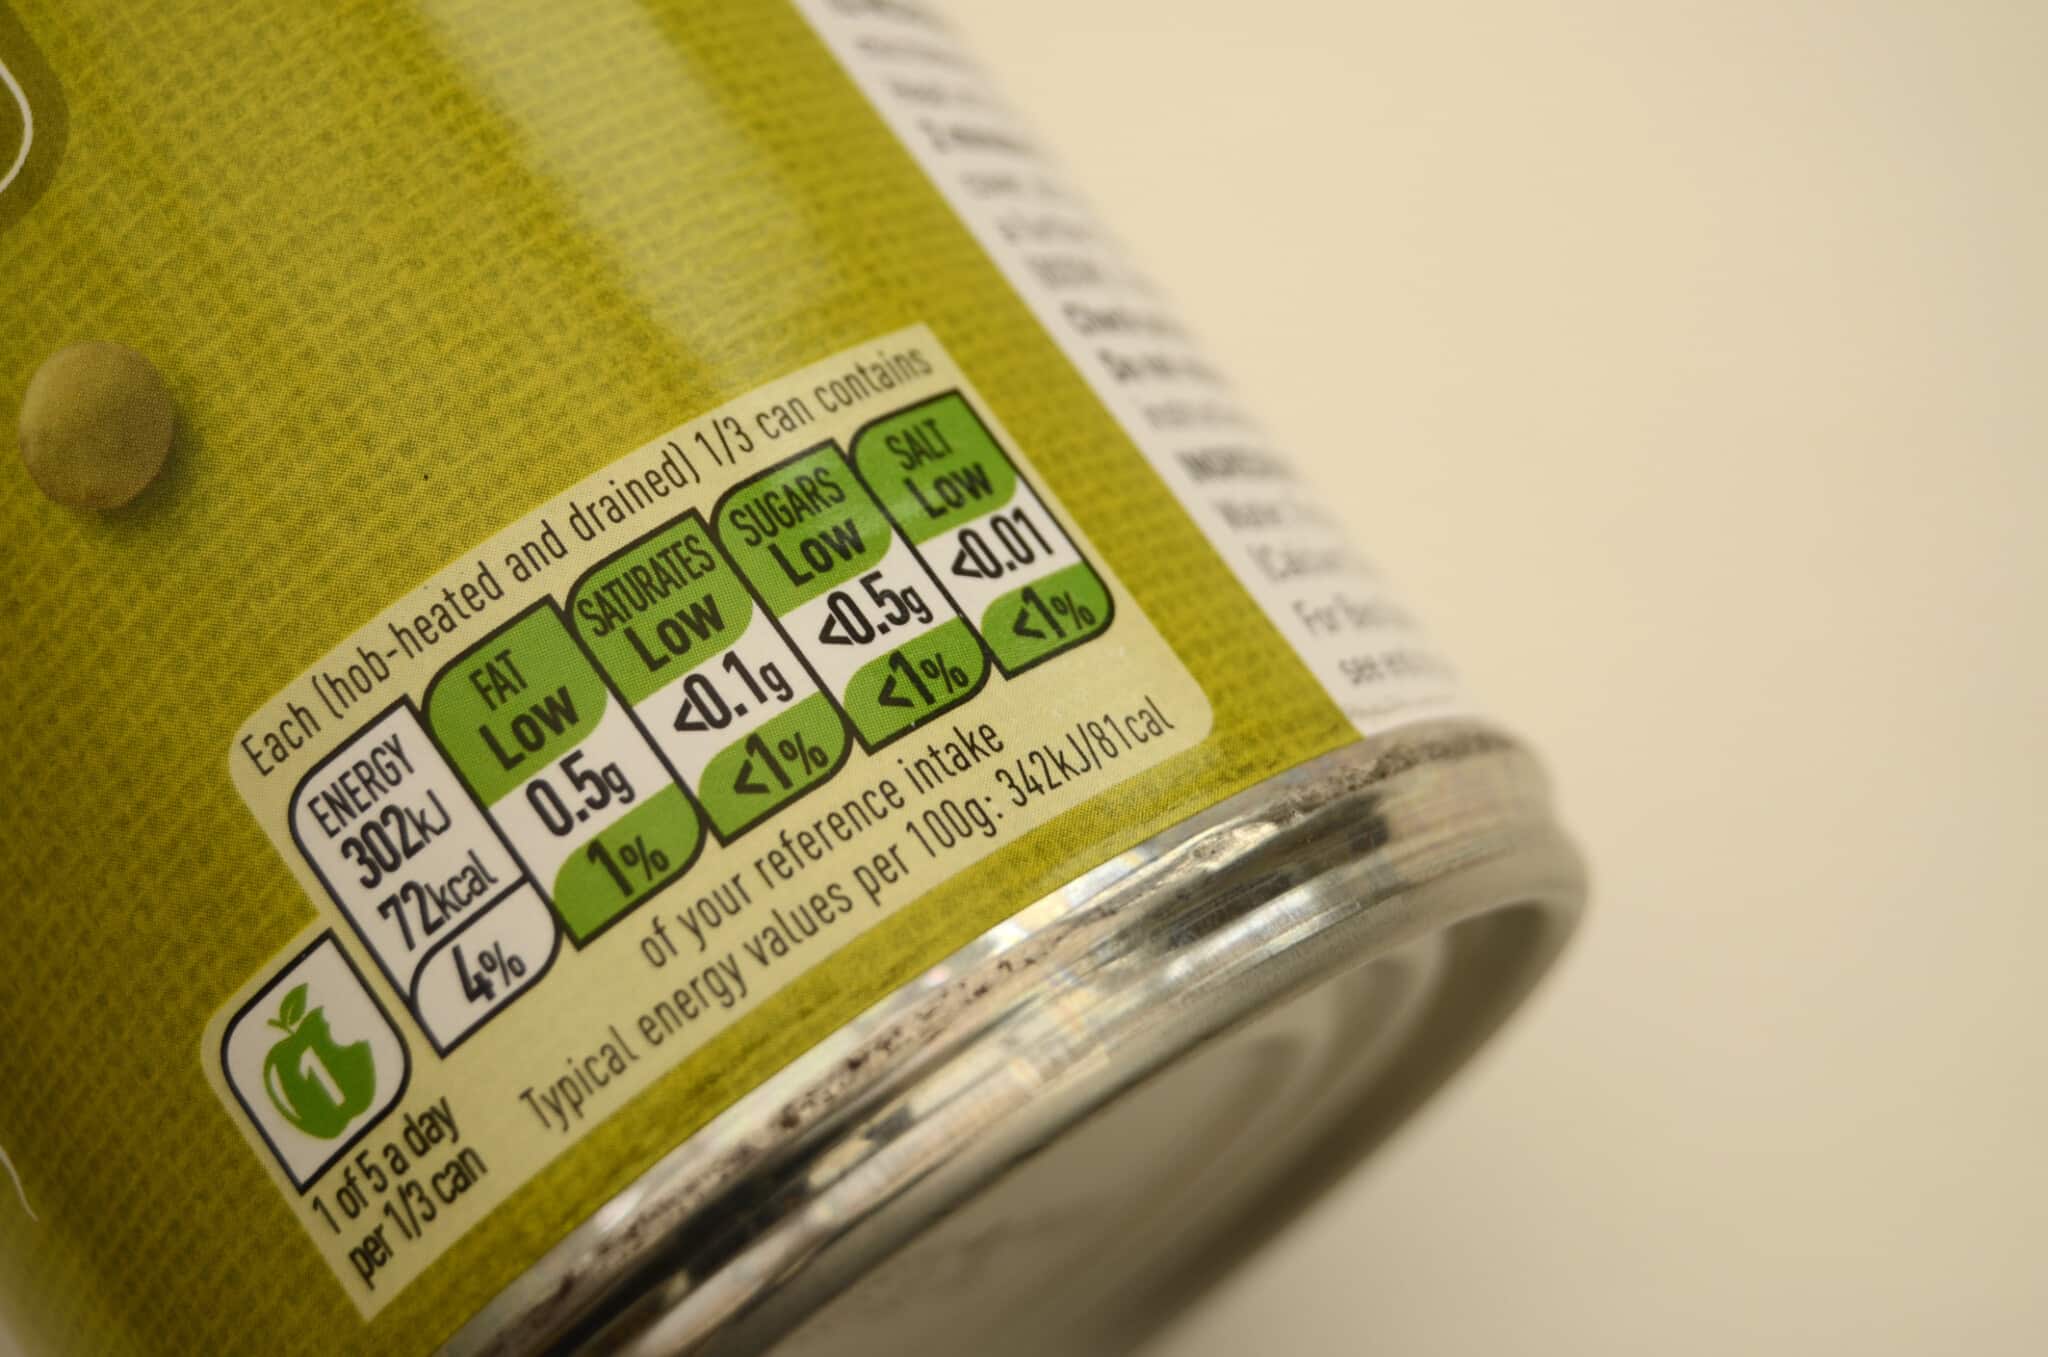 Food can with label showing nutrition information.